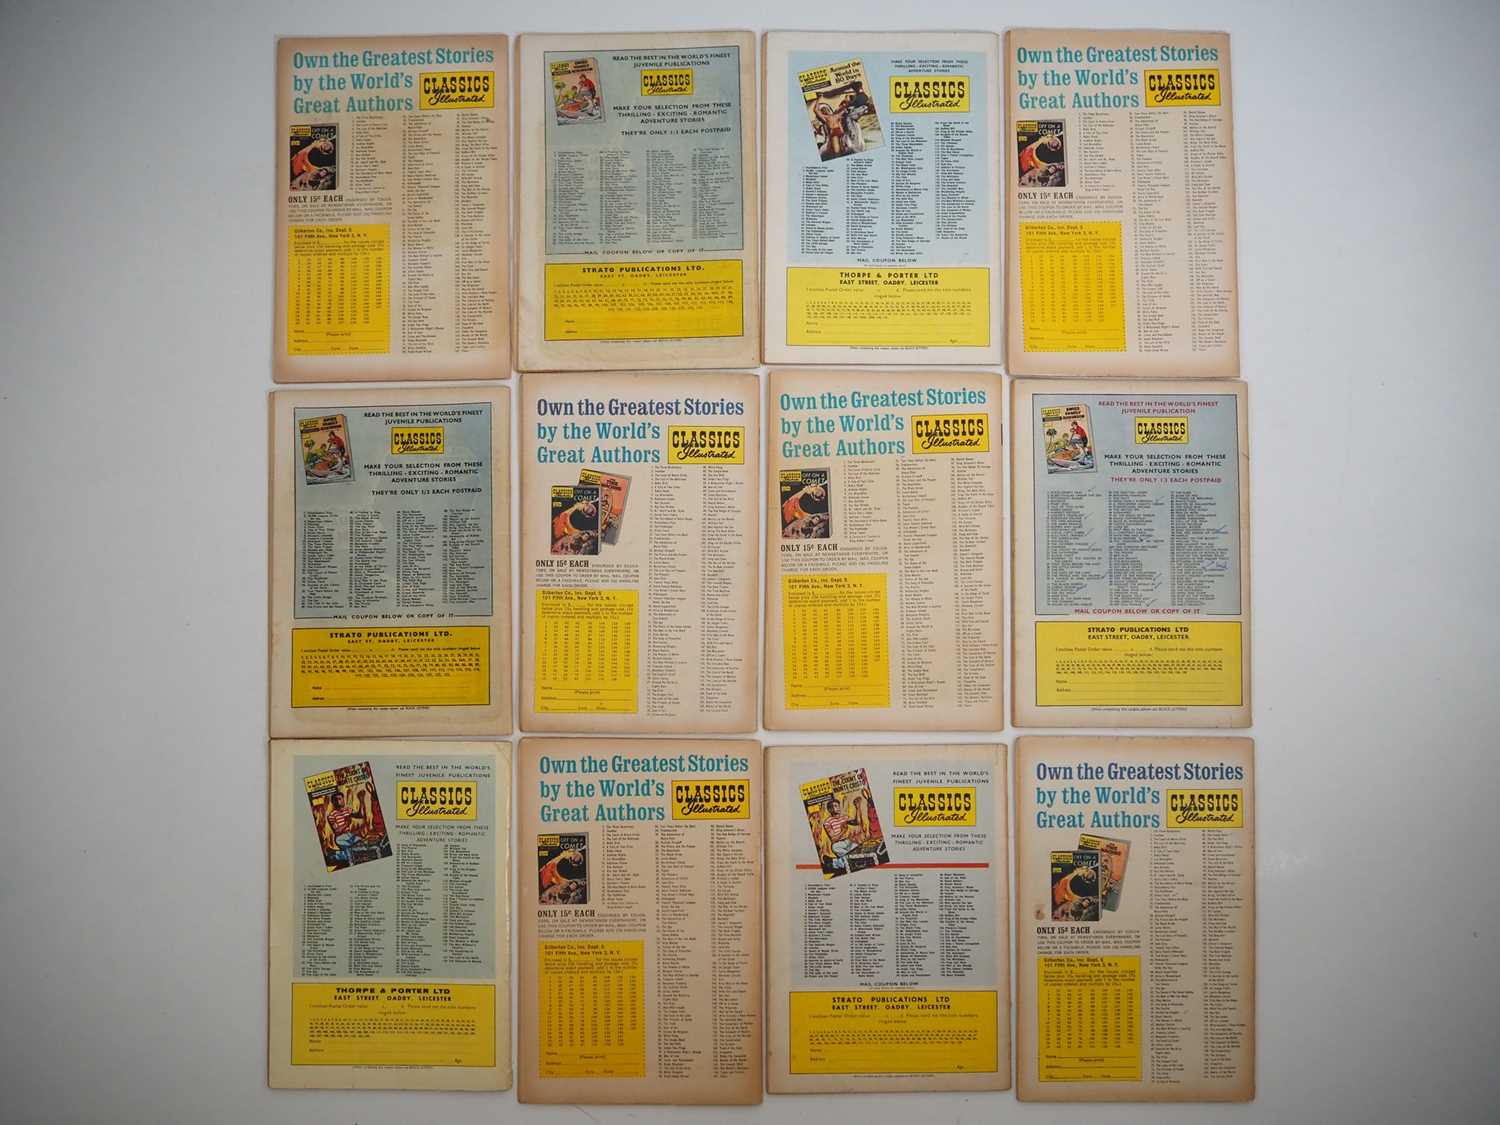 CLASSICS ILLUSTRATED: AMERICAN/BRITISH ISSUES (12 in Lot) - #3(US: HRN 167), 10(UK: HRN 153), 16(UK: - Image 2 of 2